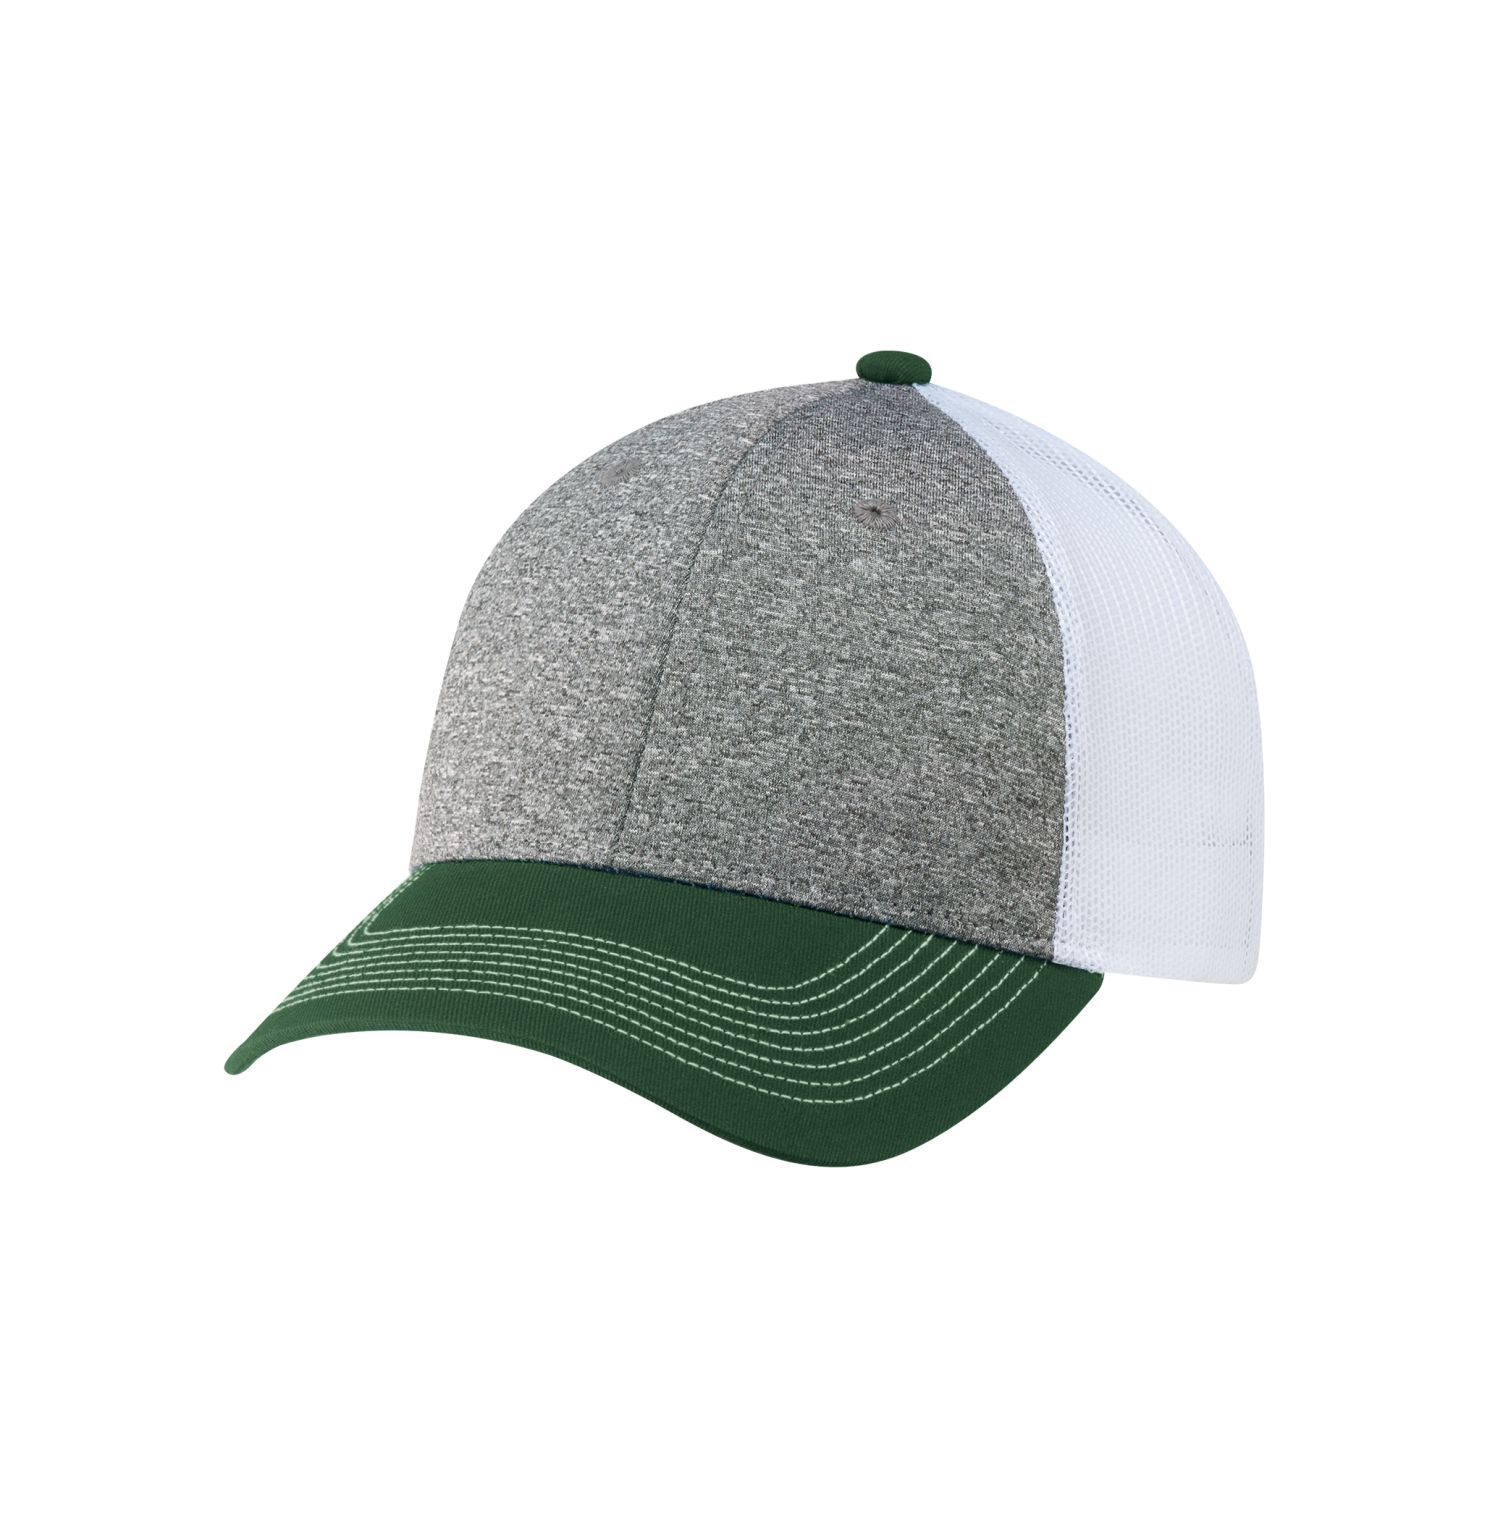 AJM Cotton Drill / Polyester Heather / Nylon Mesh 6 Panel Constructed Full-Fit Hat (Mesh Back) #4G645M Forest Green / Charcoal / White